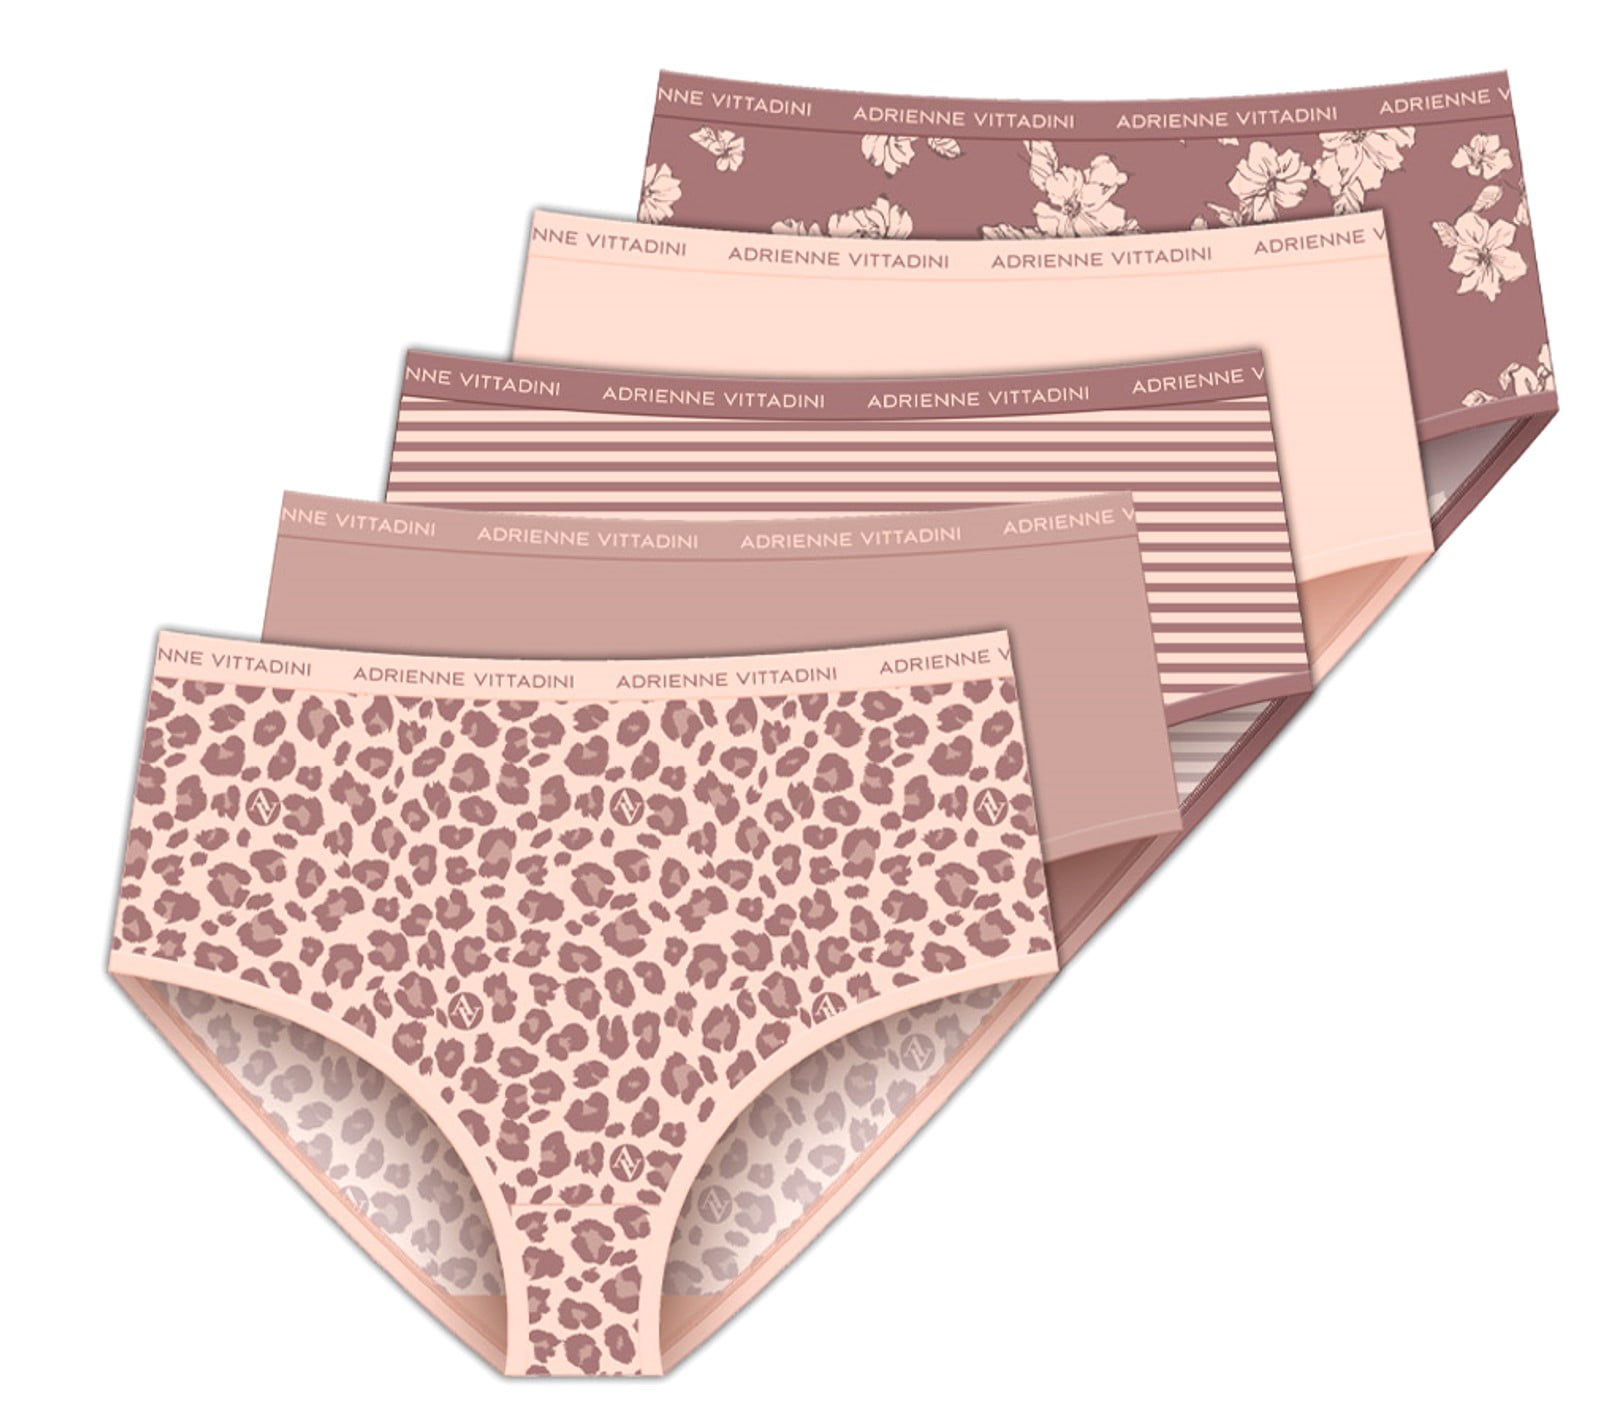 Delta Burke's Adrianne Vittadini Women's Stretch Microfiber Brief Style  Panties 5-Pack - Leopard Combo - Size 8 